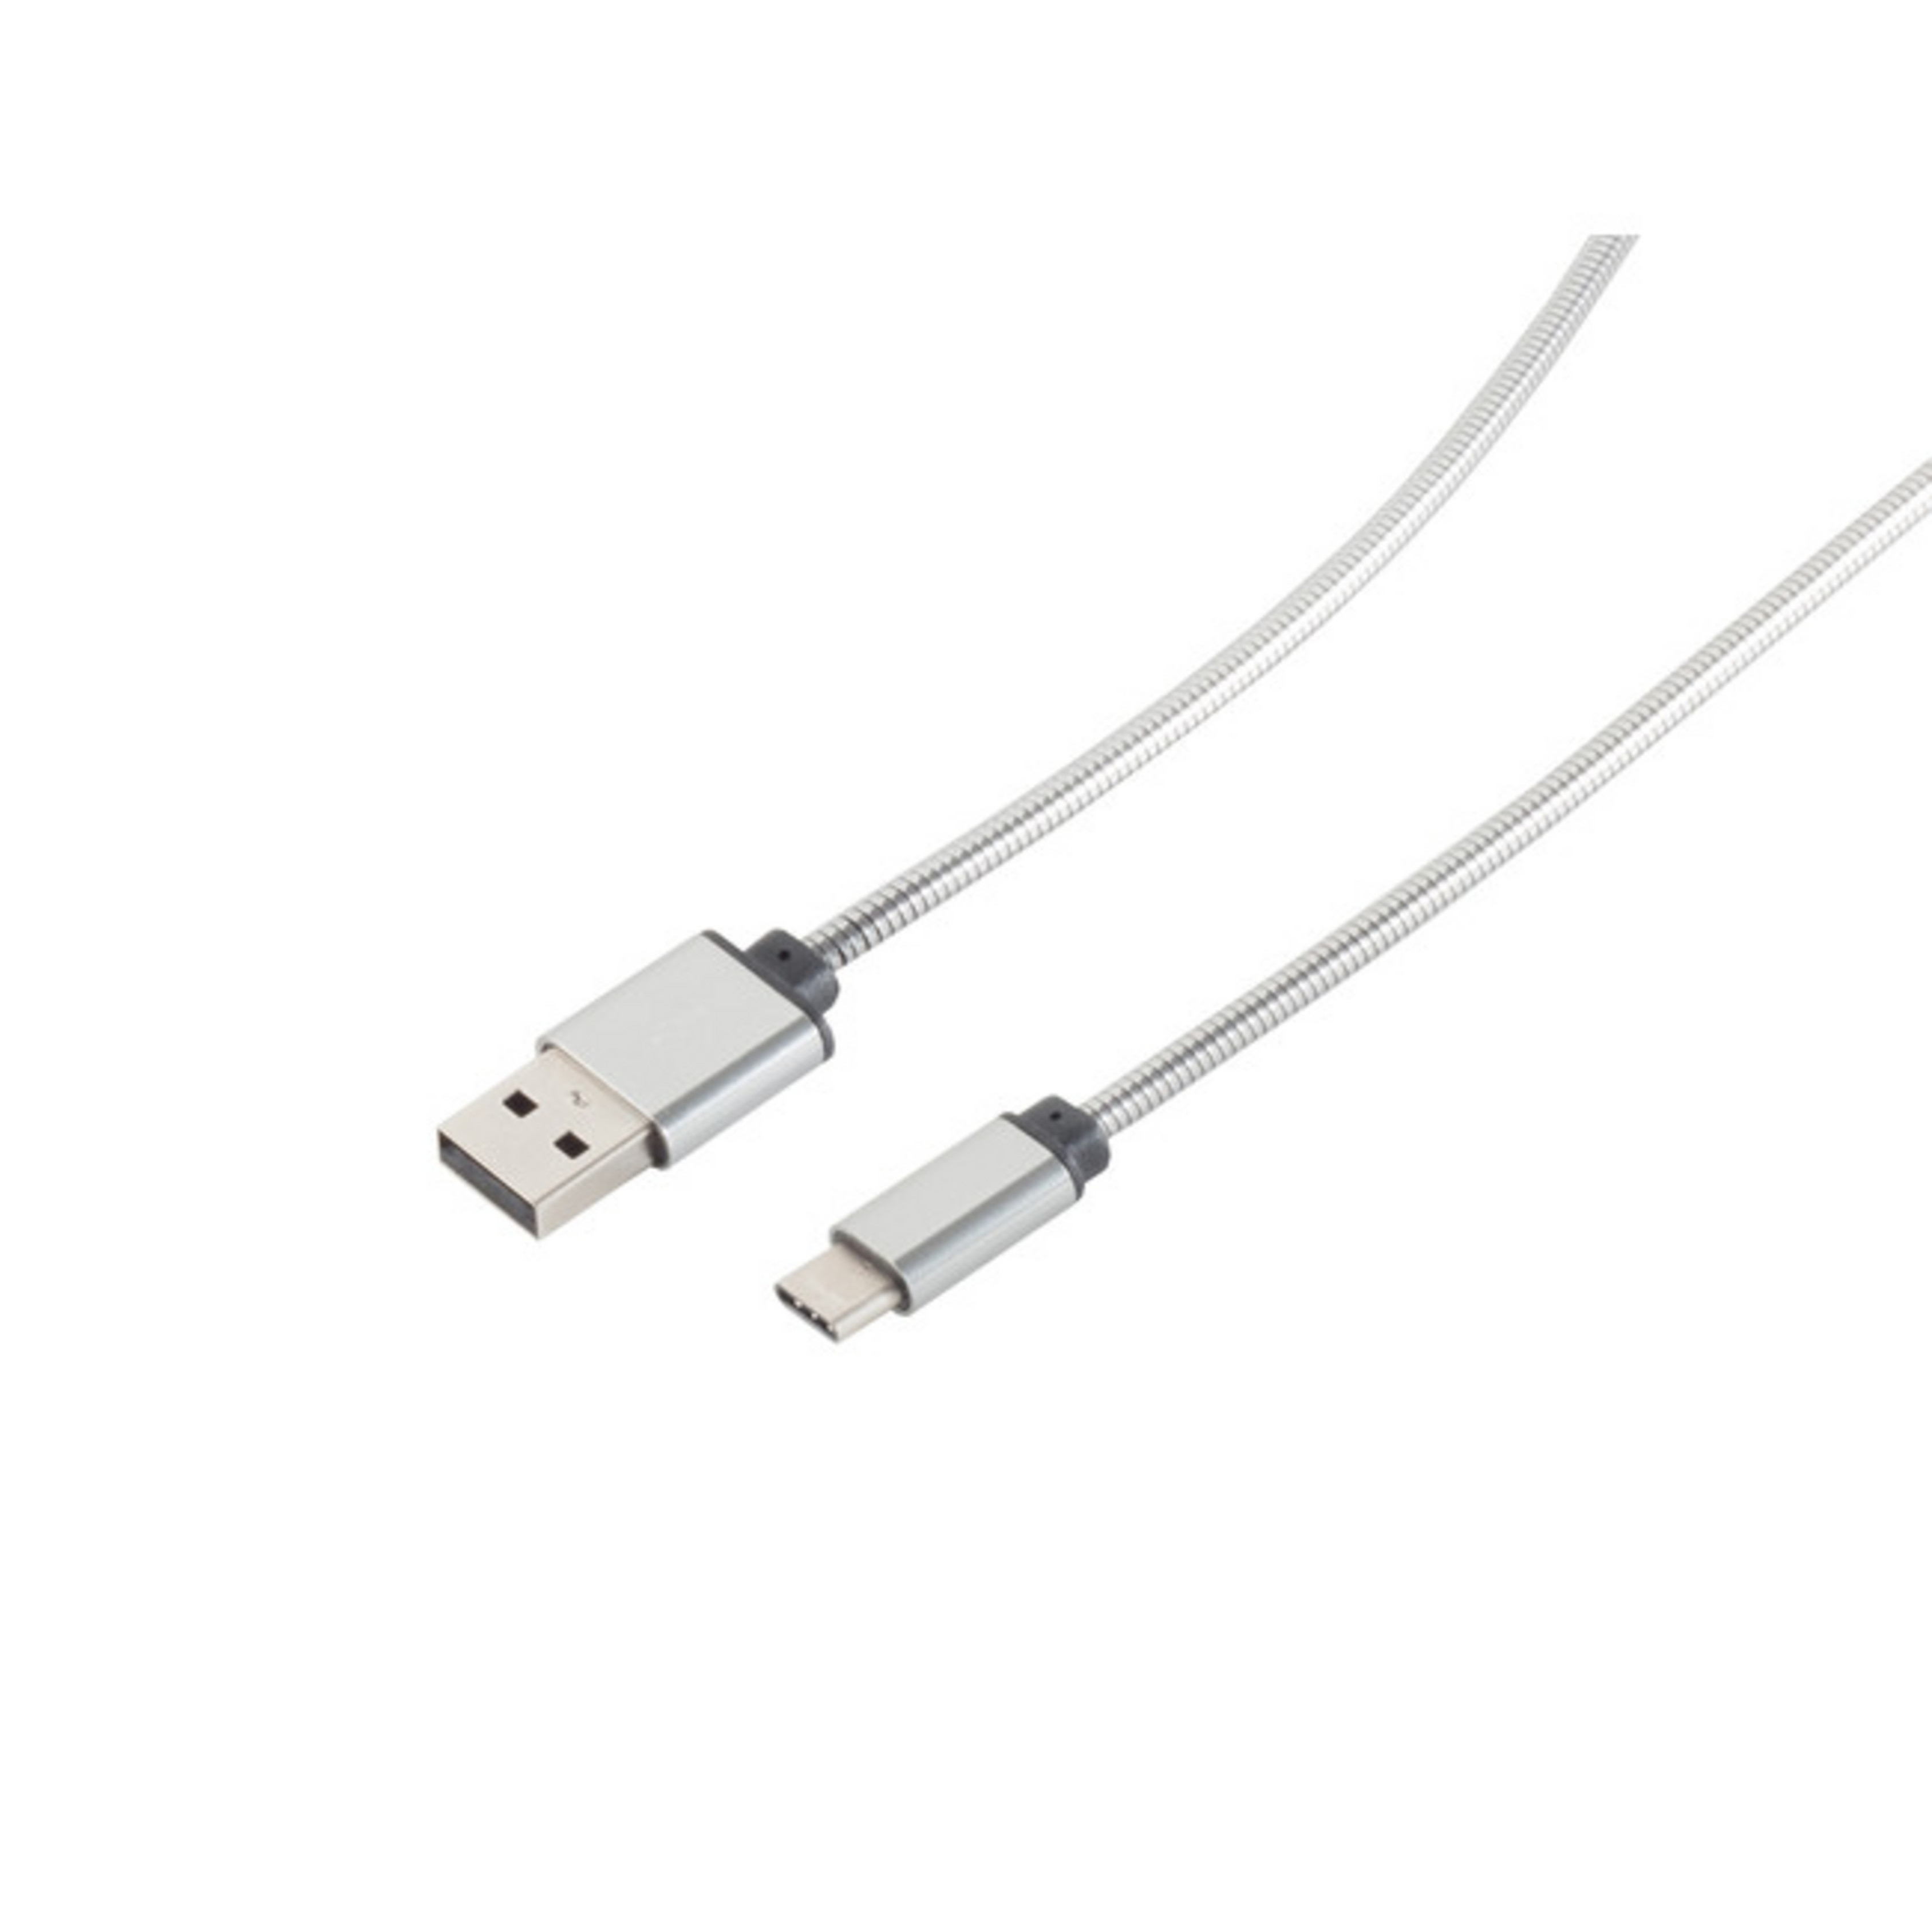 3.1 MAXIMUM C USB Steel USB Silber 1m Lade-Sync CONNECTIVITY Kabel A/ Kabel S/CONN Type